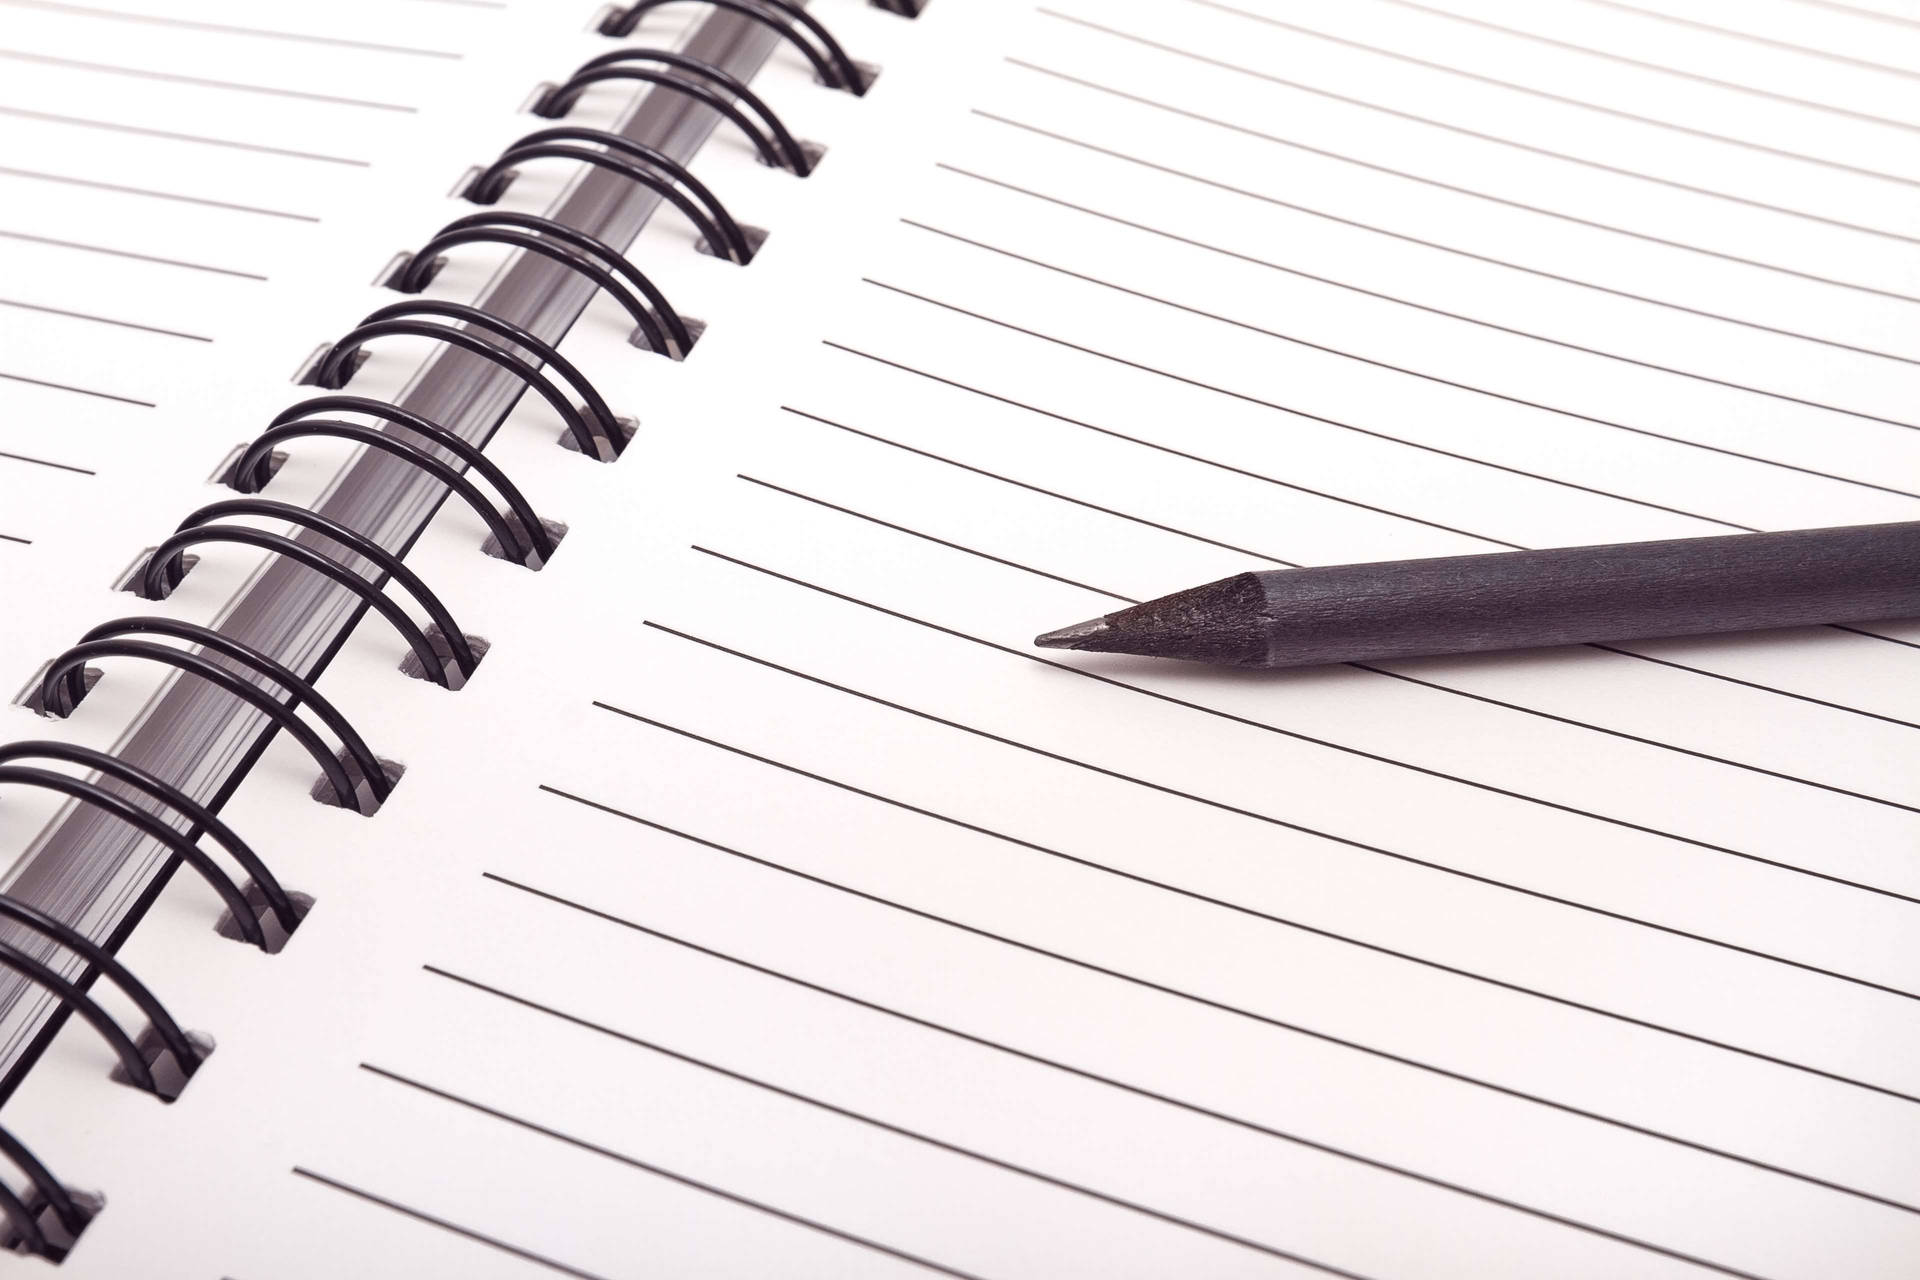 Close-up view of a blank page in a spiral notebook with a pen alongside. Wallpaper